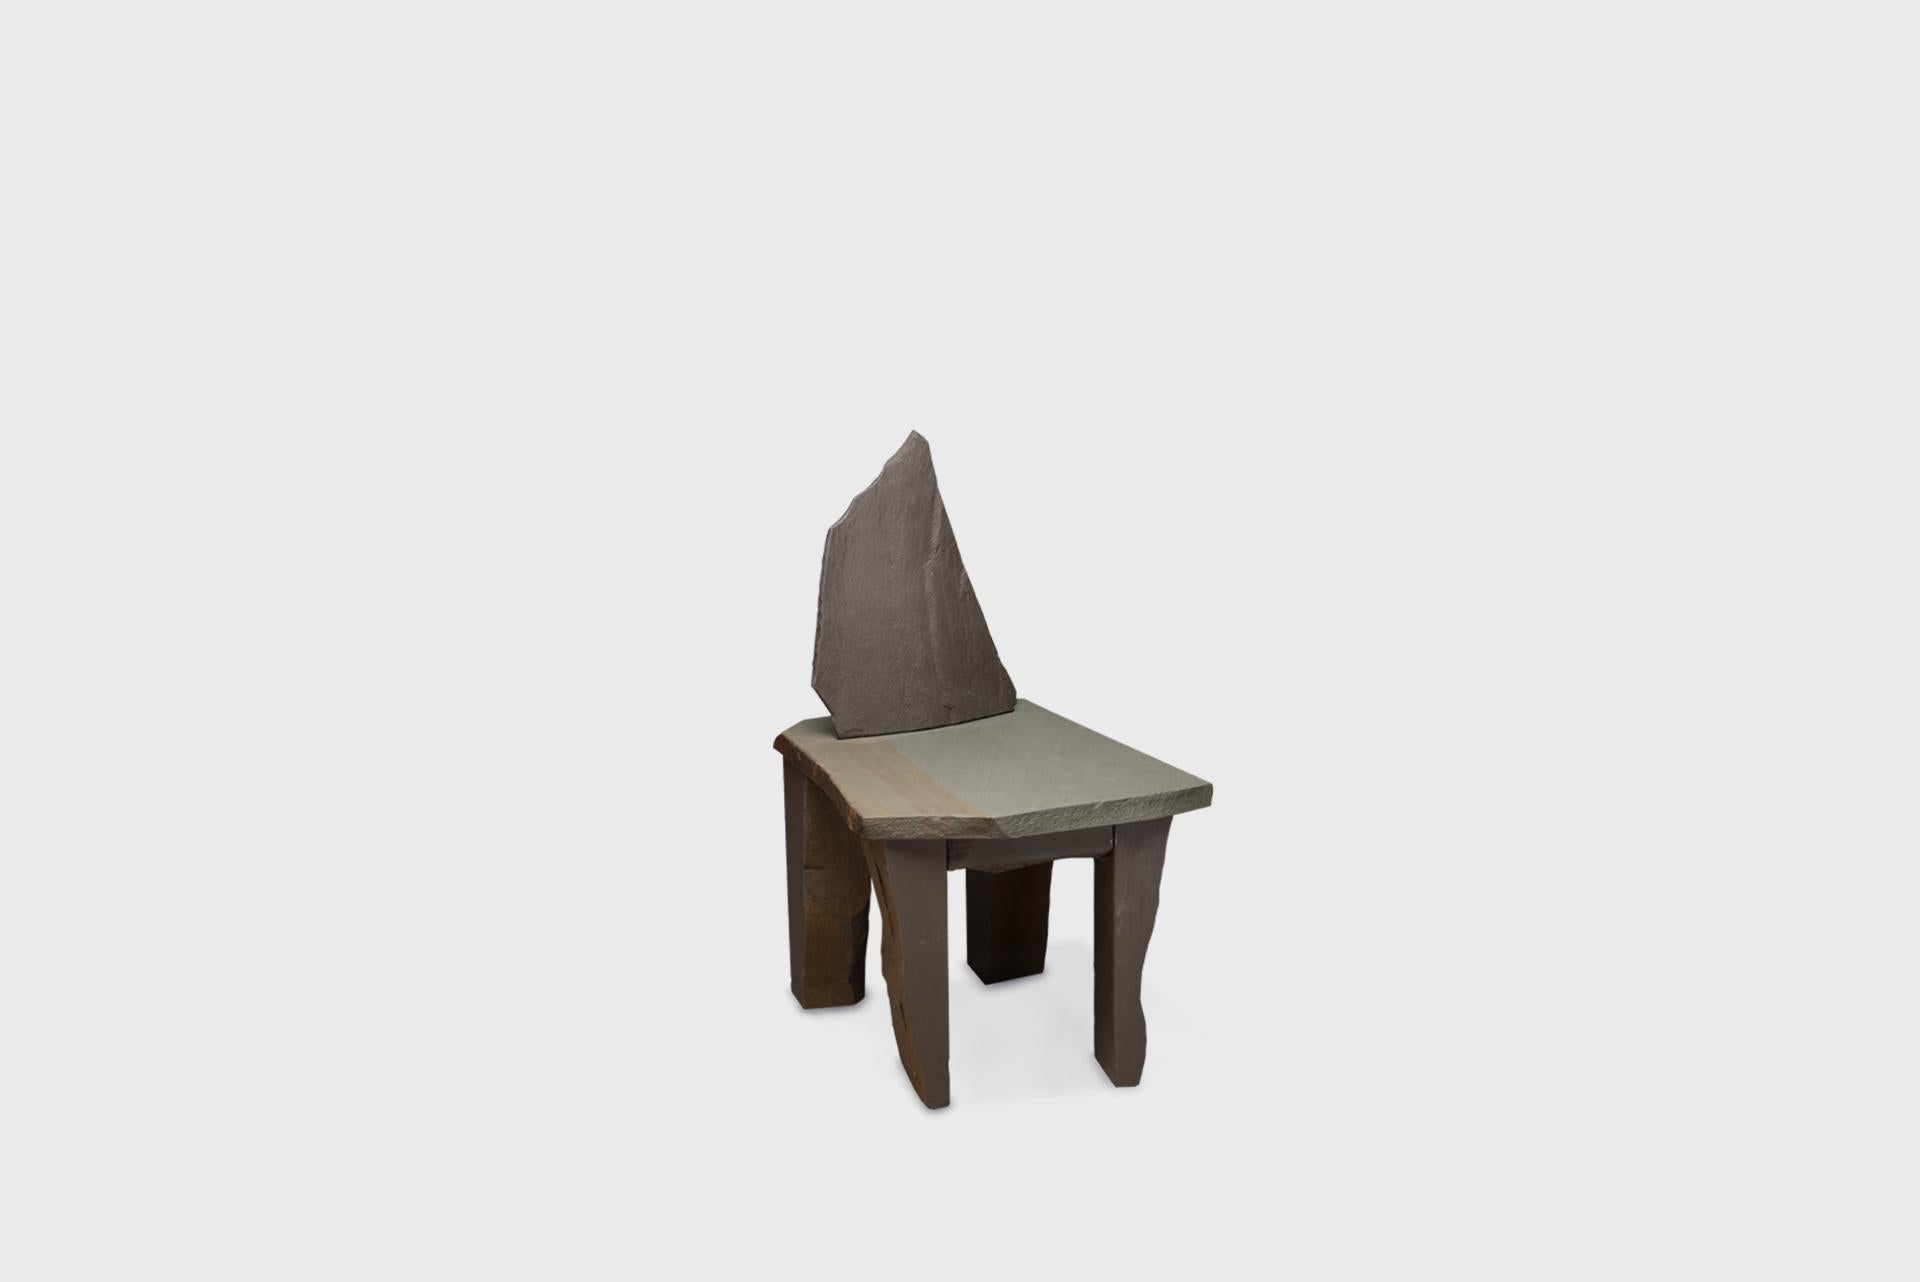 Contemporary Natural Chair 16, Graywacke Offcut Gray Stone, Carsten in der Elst For Sale 6